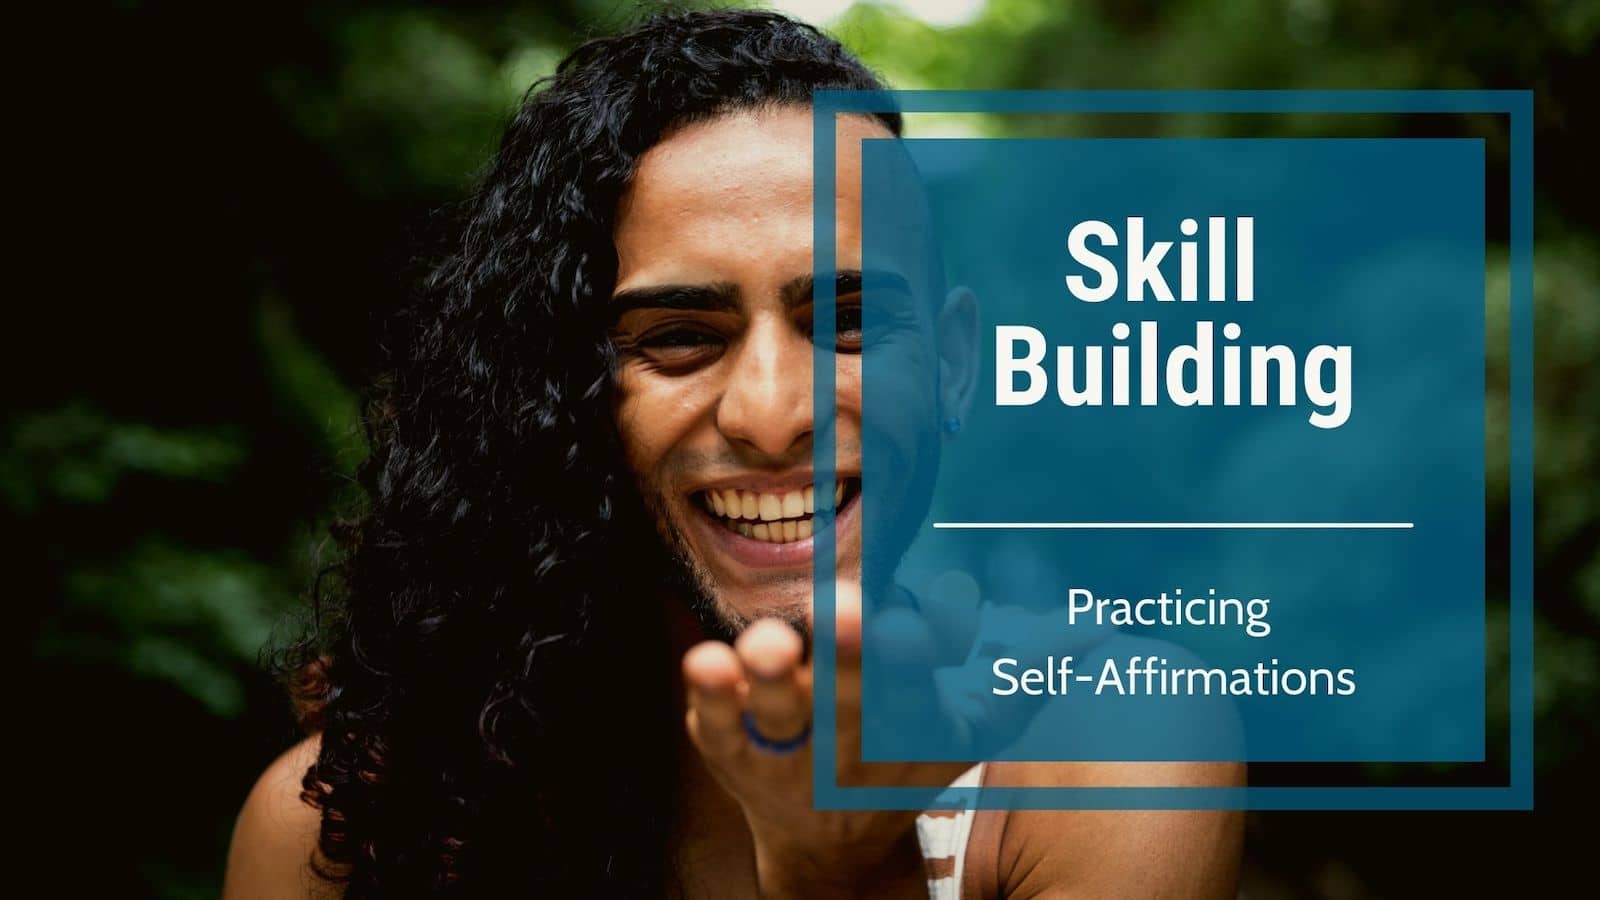 Video Skill building practice-Self affirmations